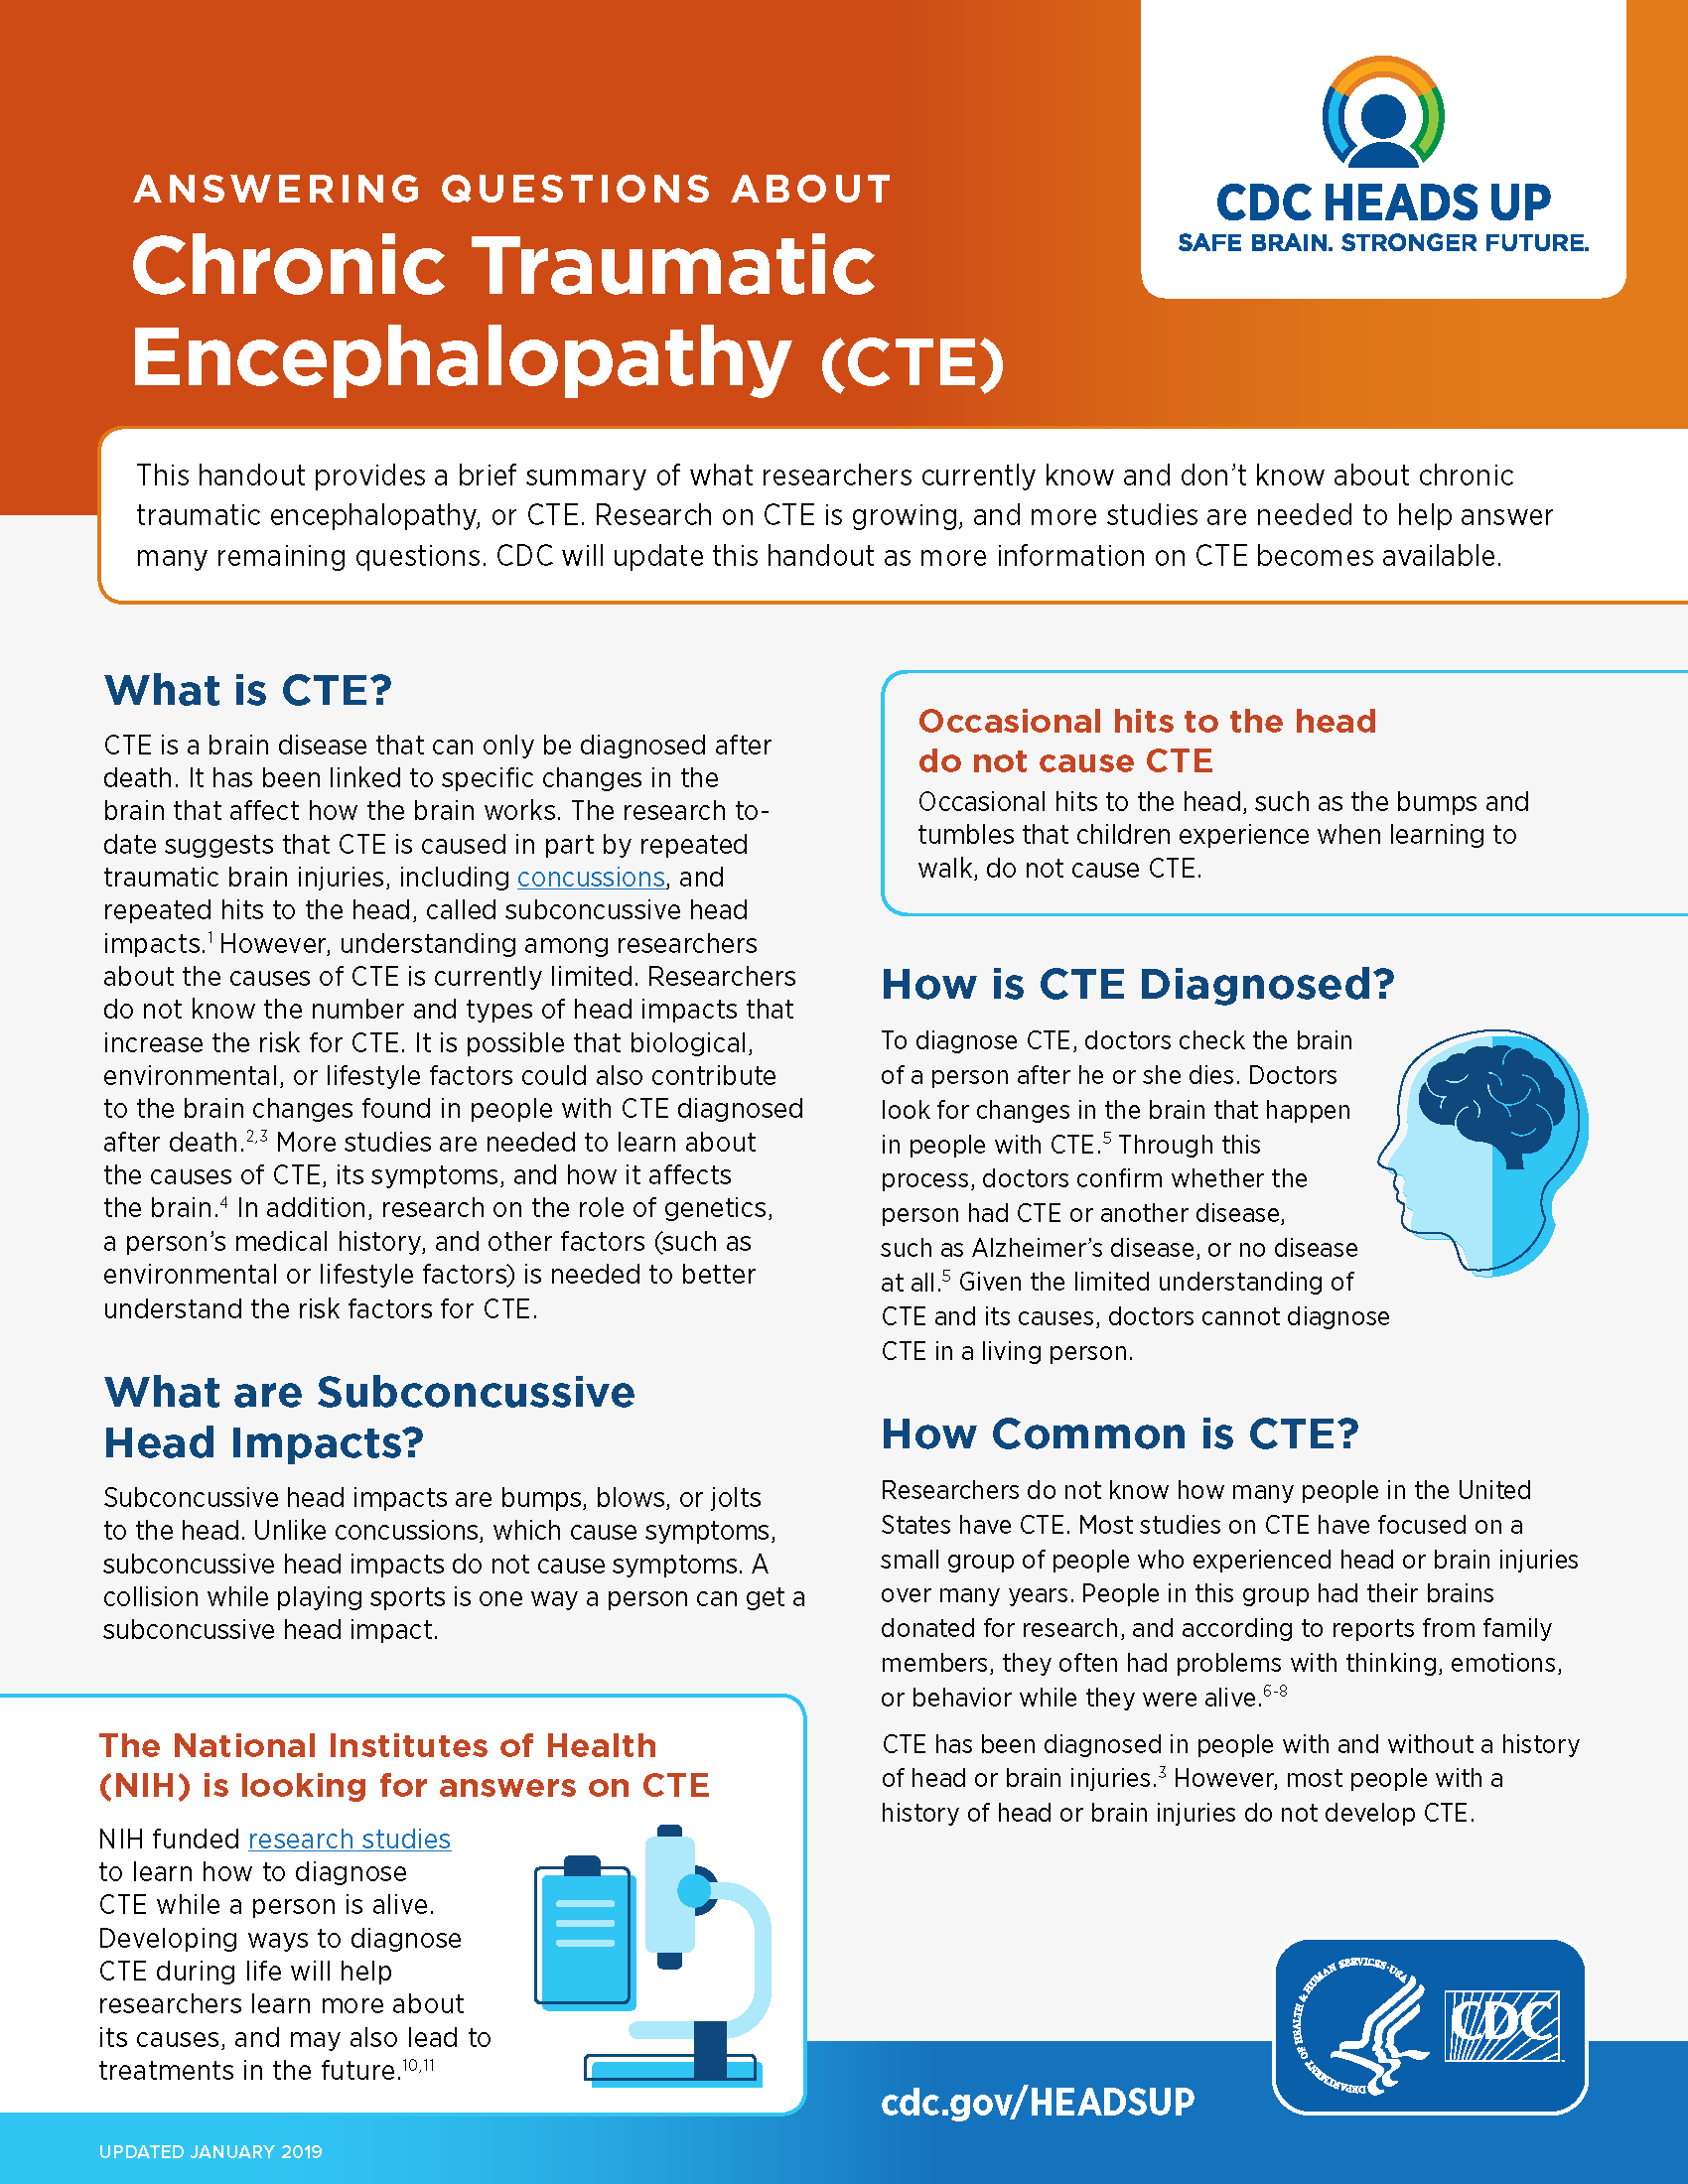 Page one of the CTE Factsheet from the CDC